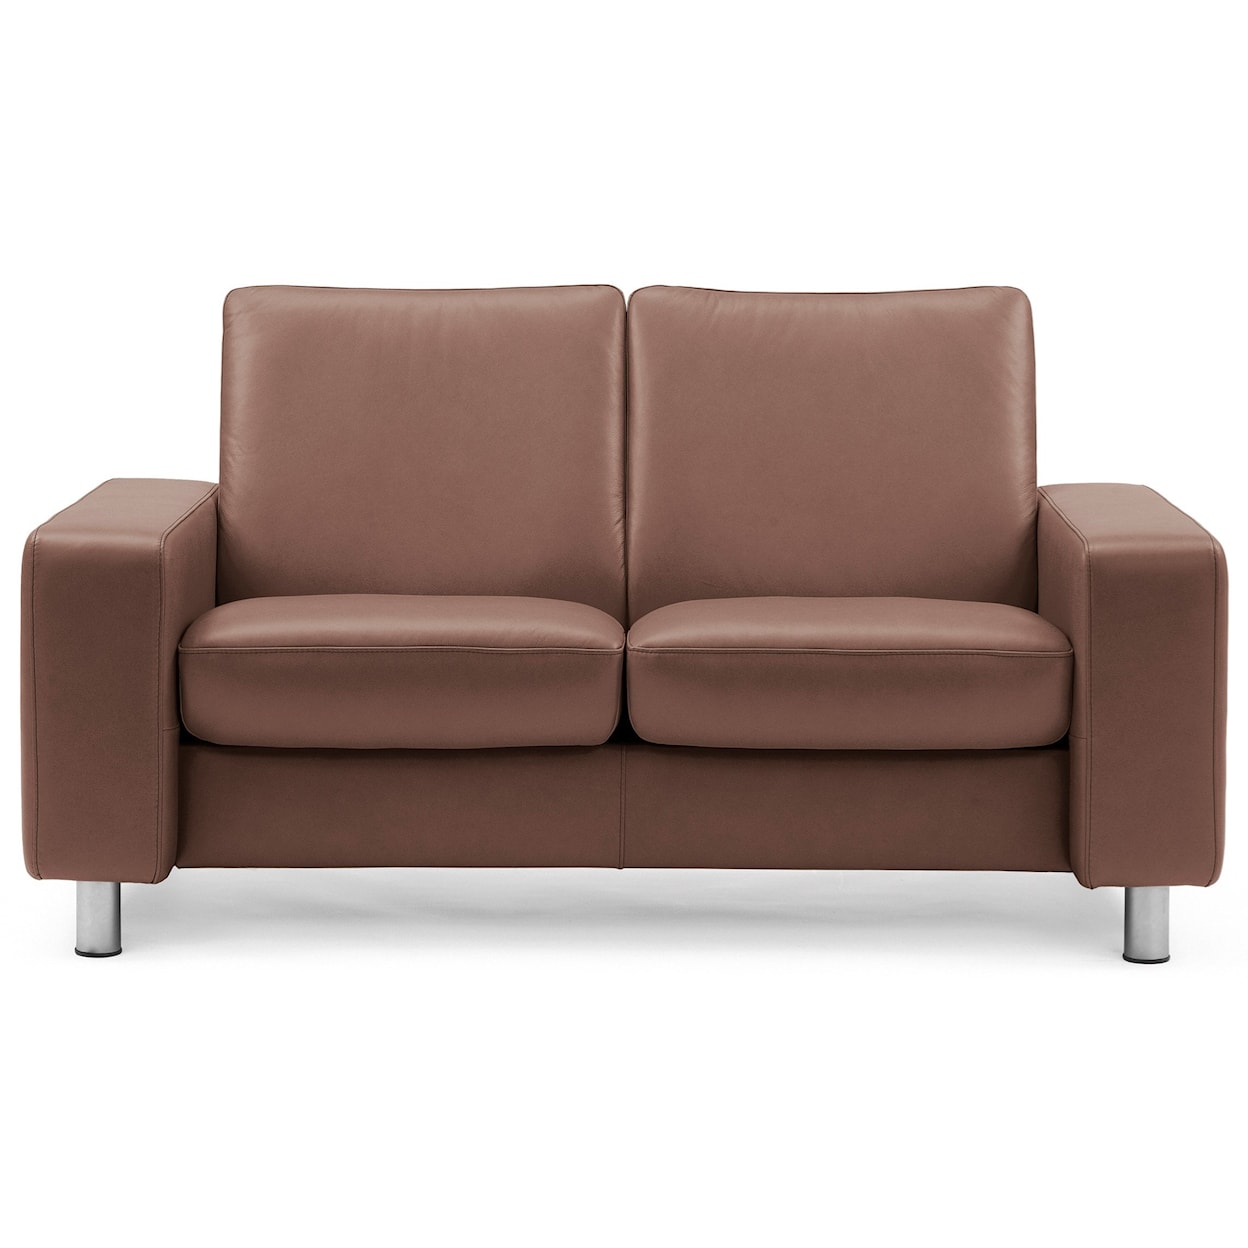 Stressless Arion 19 - A20 Low-Back Reclining Loveseat